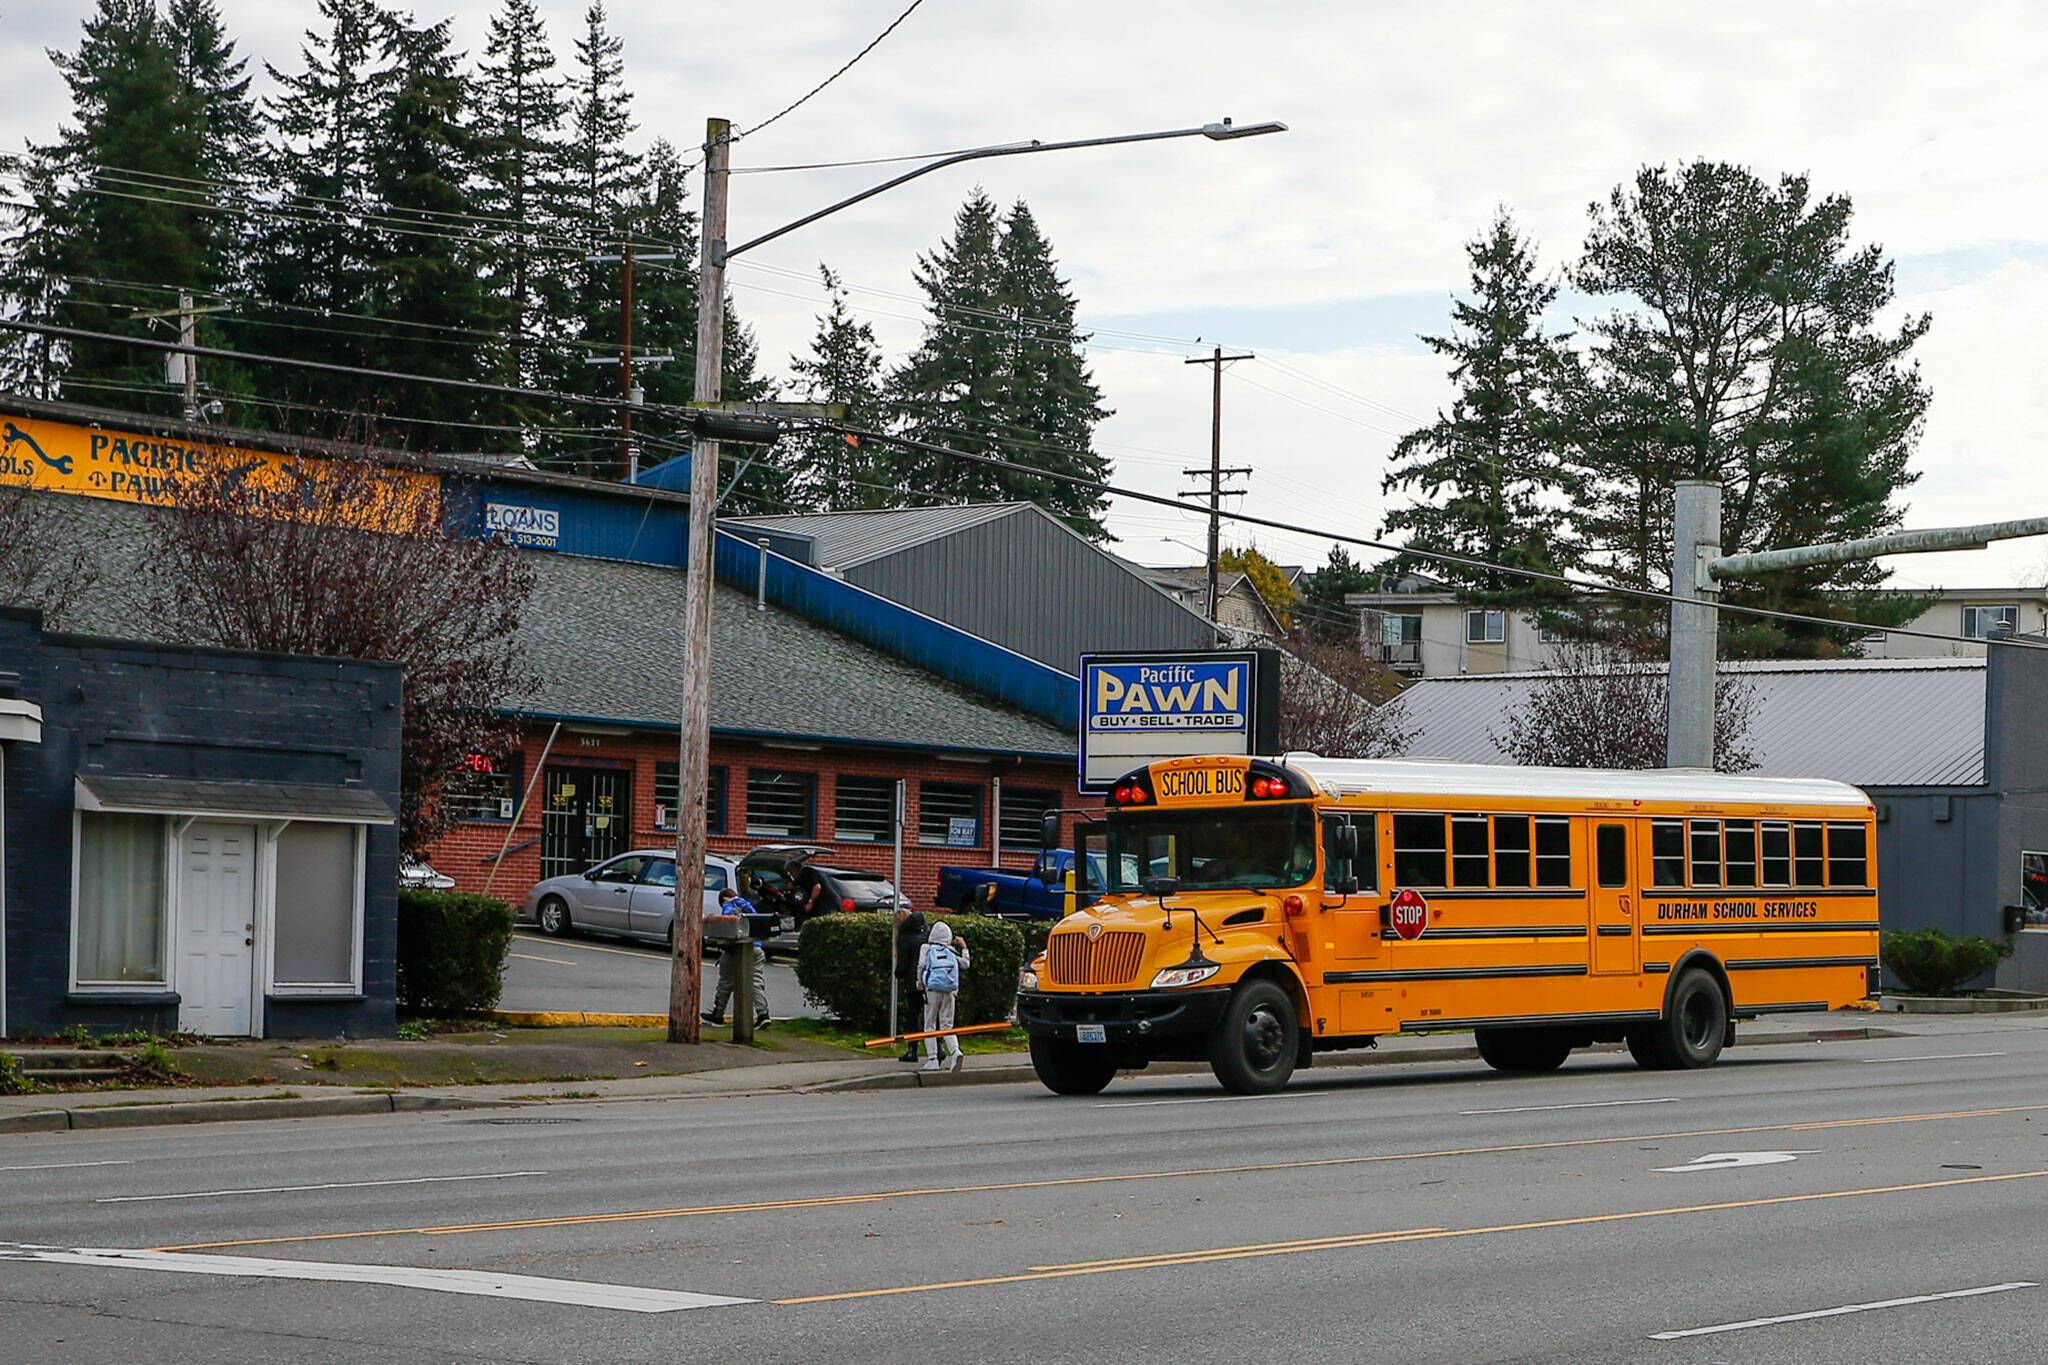 Students unload from a school bus Wednesday afternoon on Evergreen Way in Everett. When a school bus is loading and unloading students and has its stop sign out and red lights flashing, it is illegal to pass from behind. (Kevin Clark / The Herald)